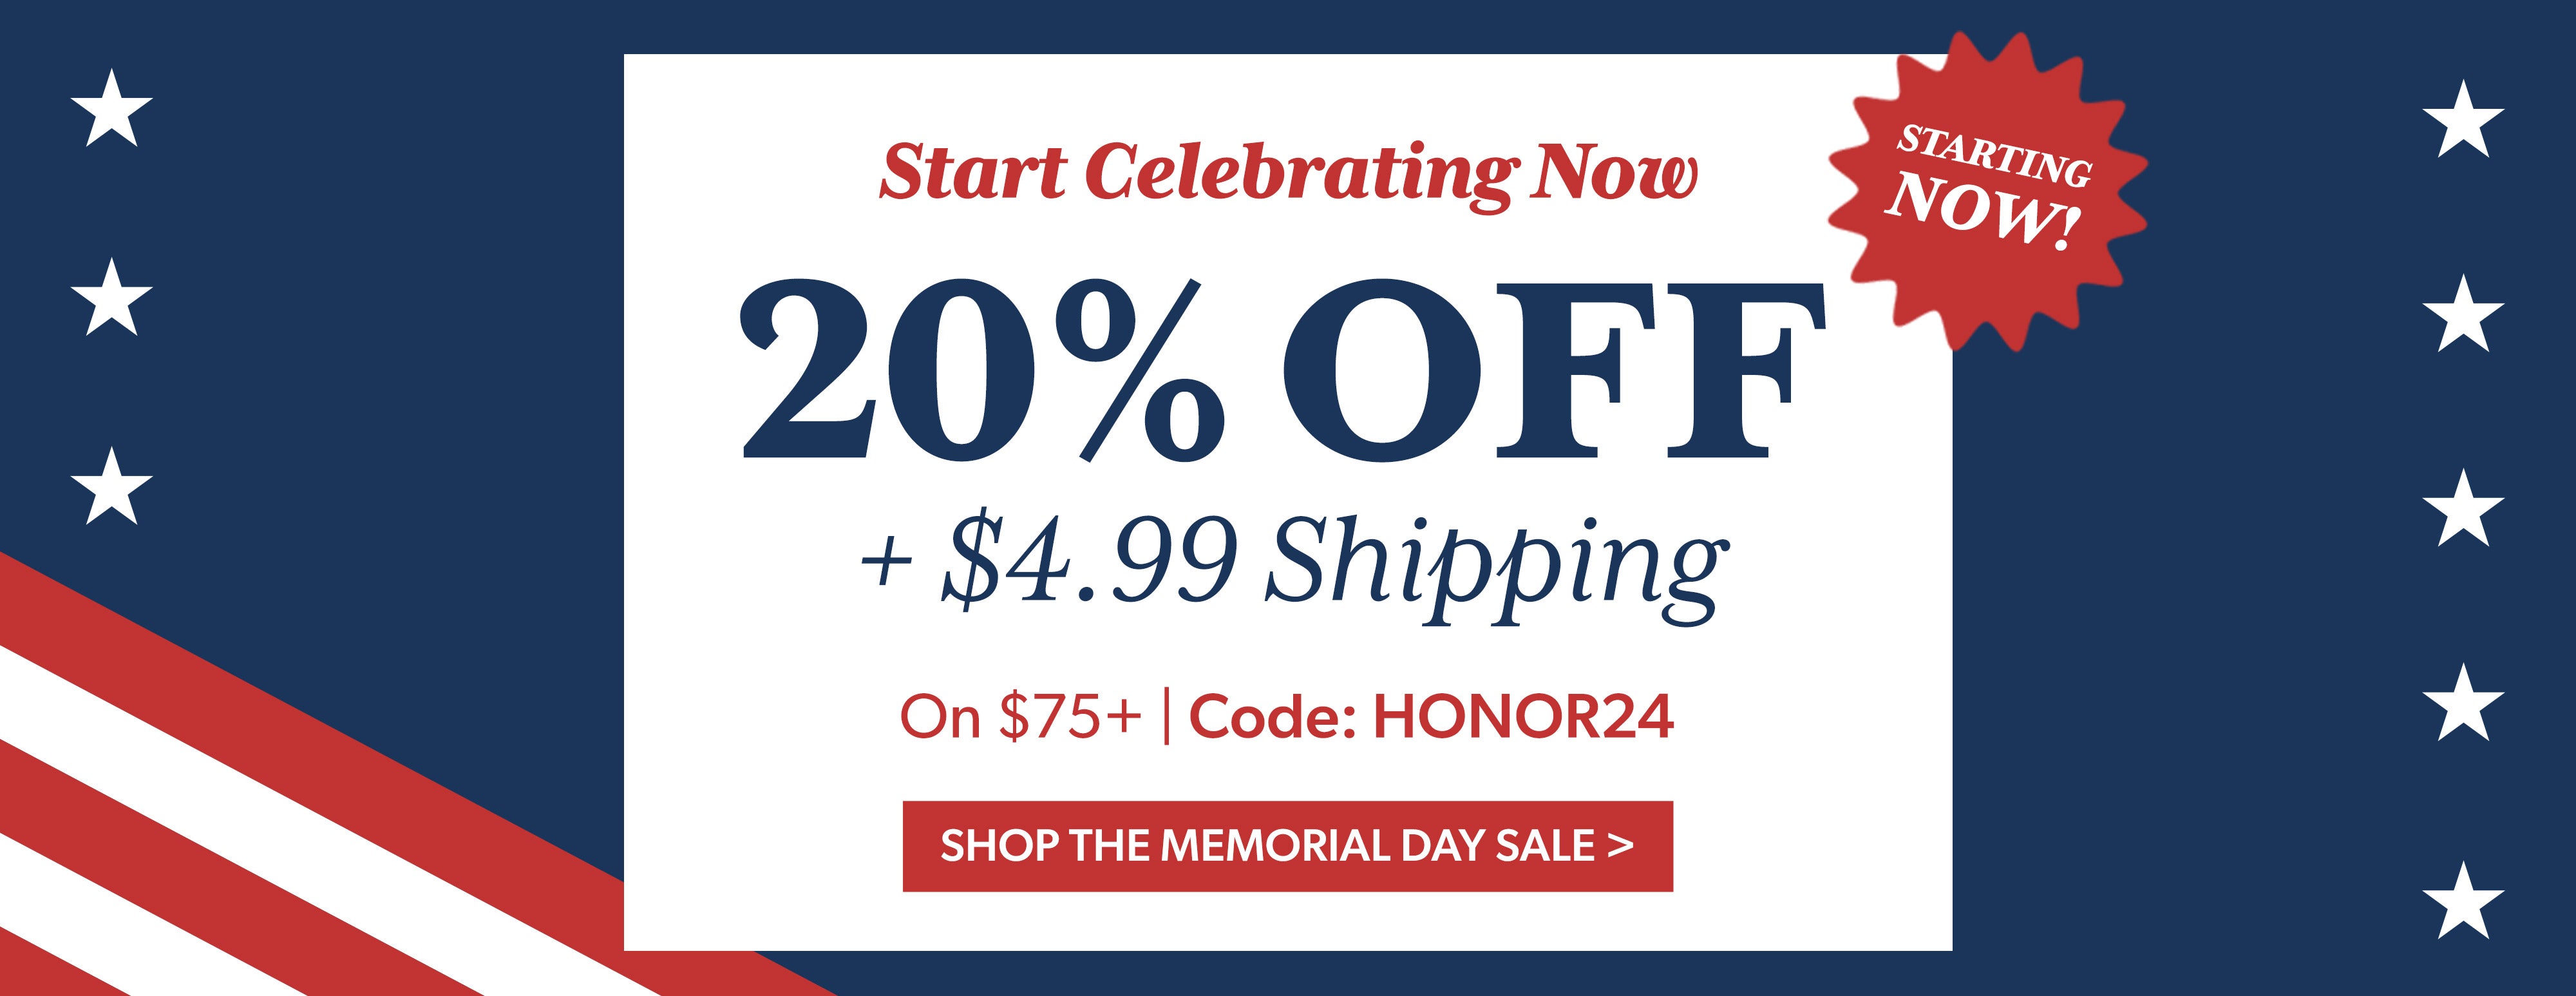 Start Celebrating Now 20% Off + $6.99 shipping on orders $75+ | Code: HONOR24 | Shop Now